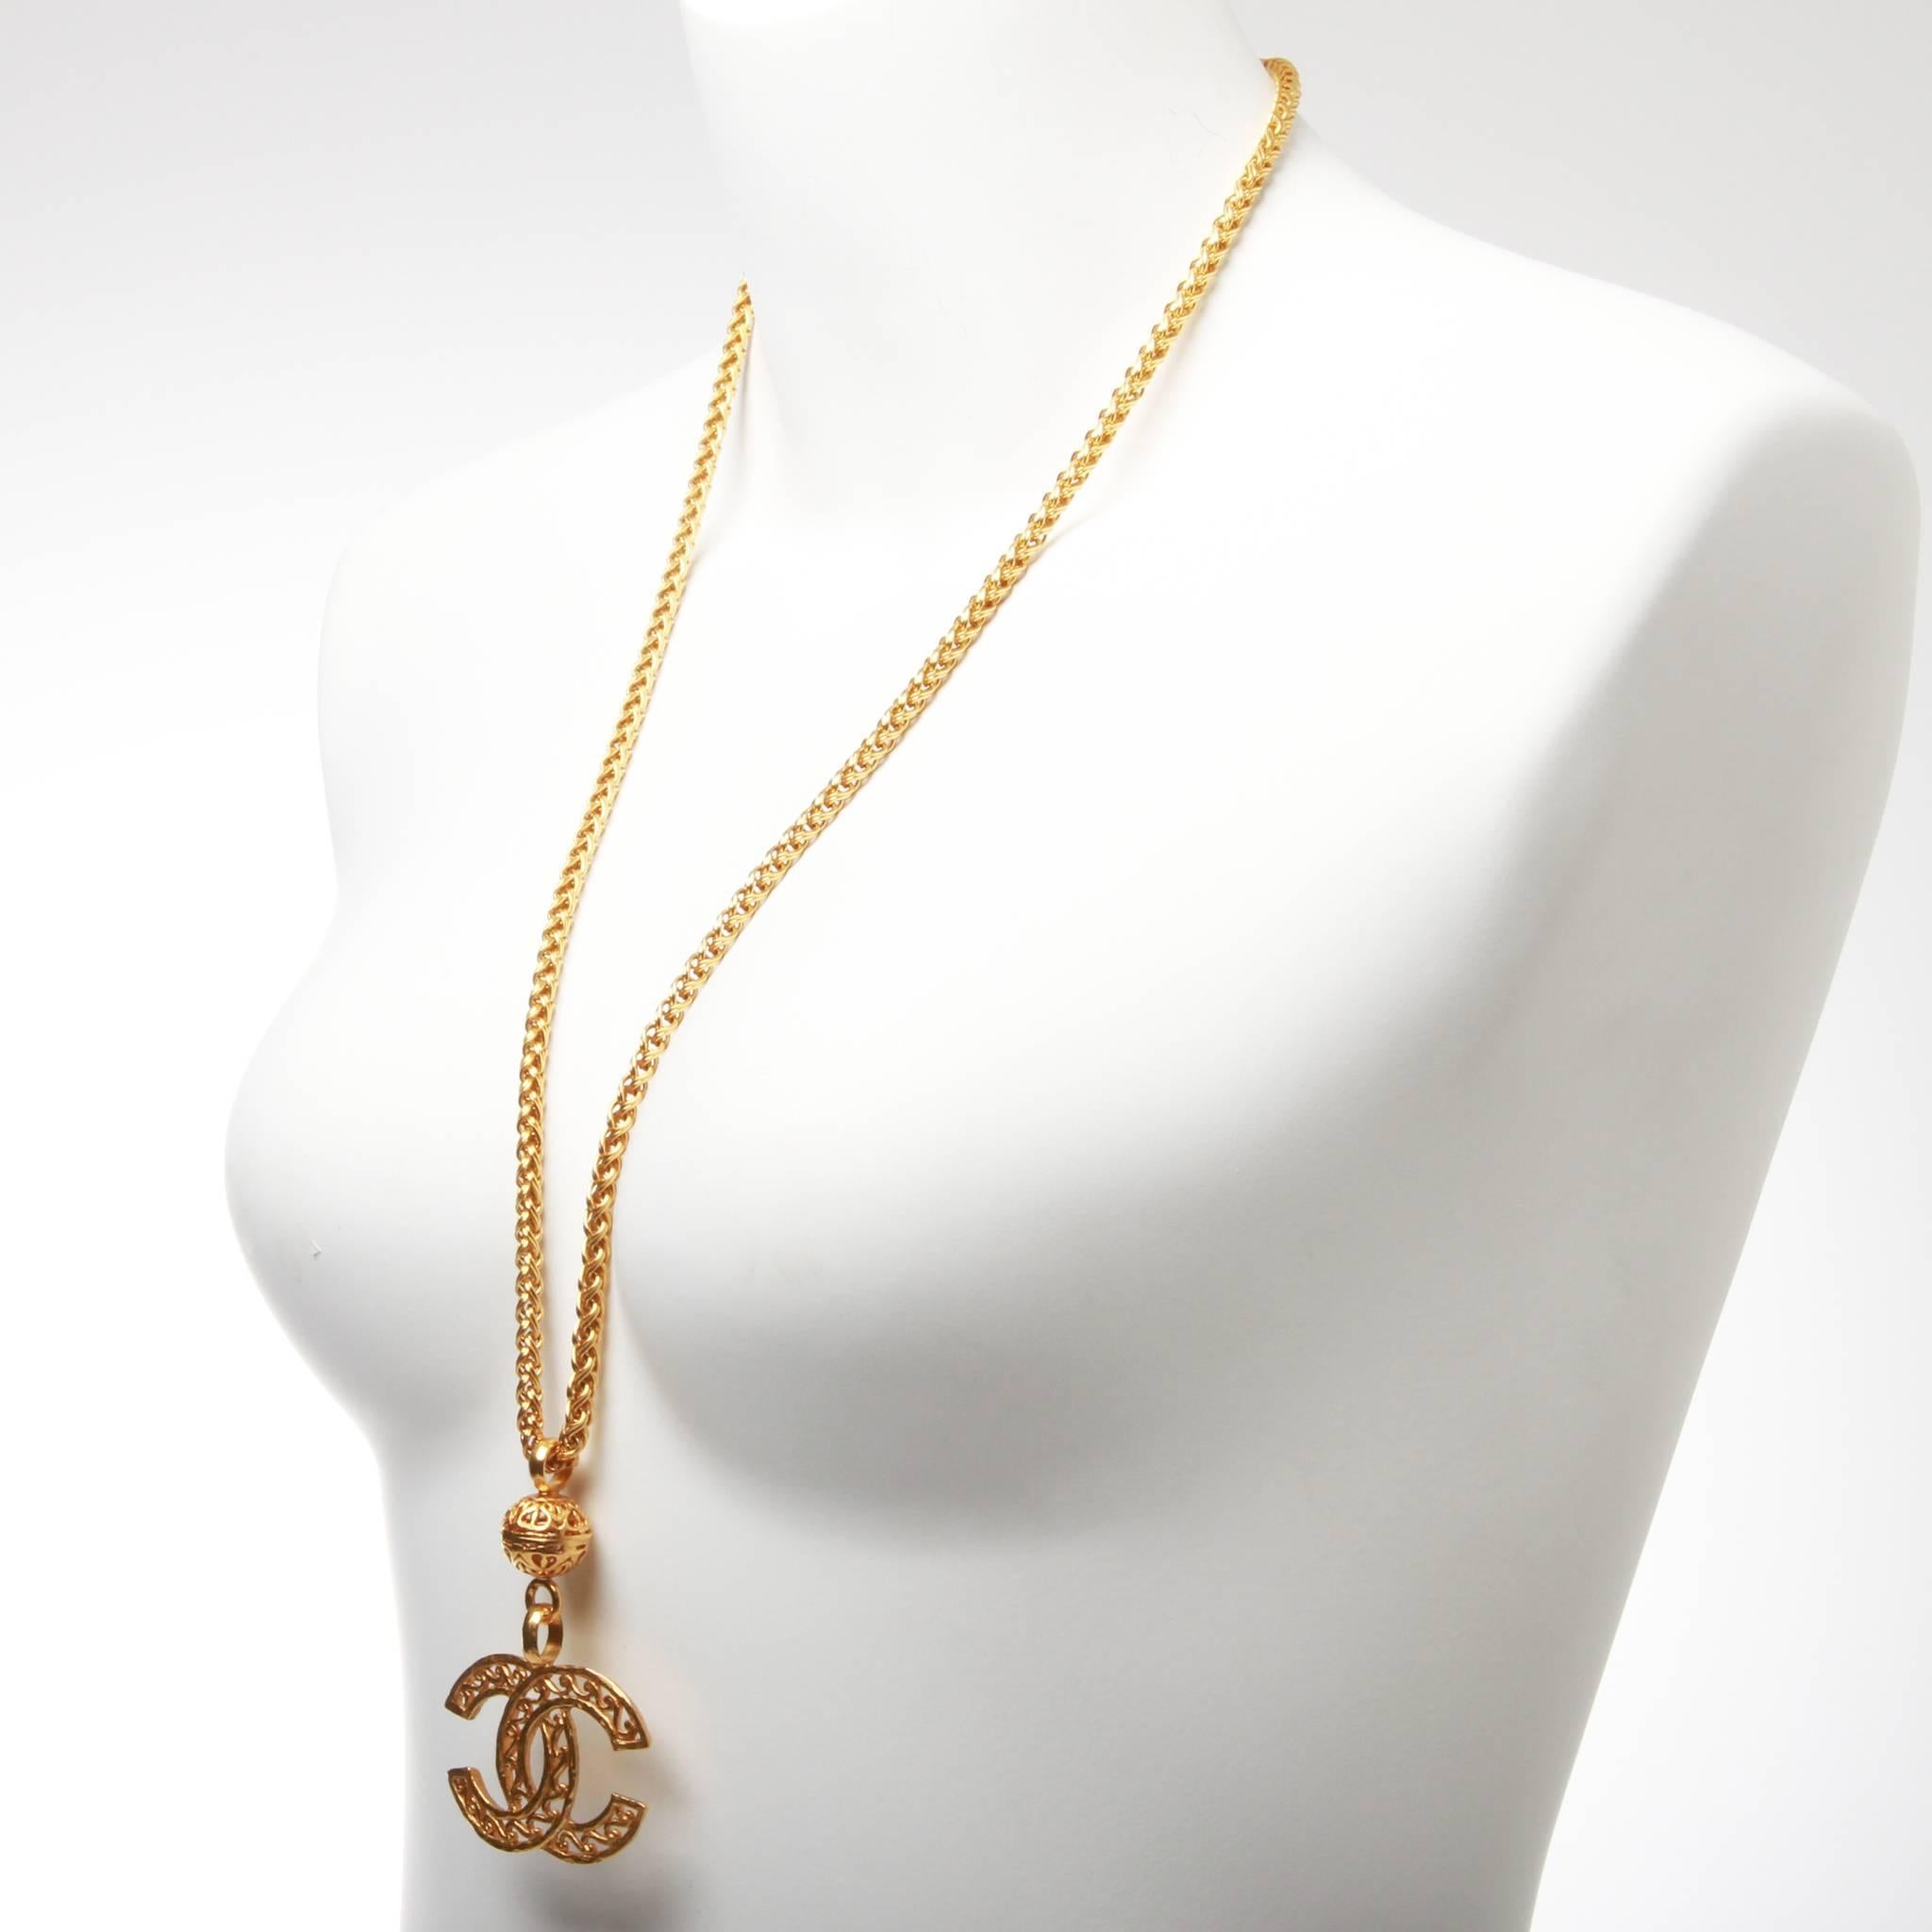 Vintage Chanel iconic CC logo pendant on a lariat length chain. Hook and eye fastening features Chanel CC logo and Made in France stamp.

Comes with authentic box.
